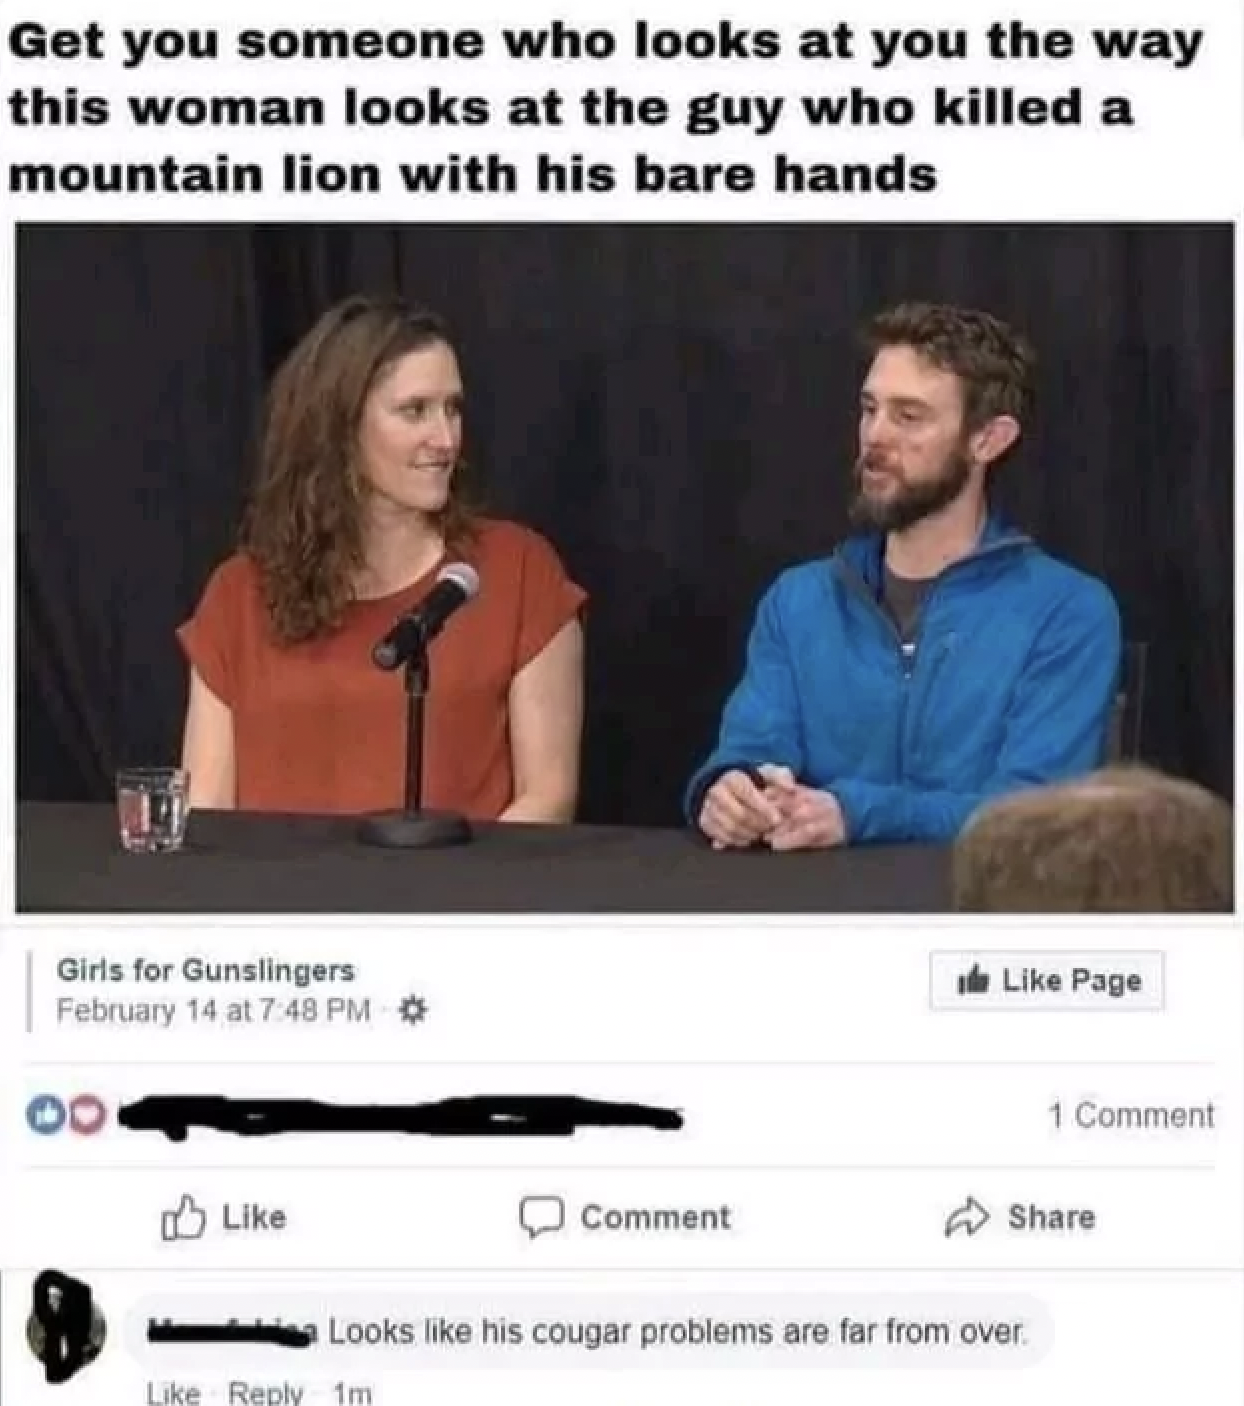 photo caption - Get you someone who looks at you the way this woman looks at the guy who killed a mountain lion with his bare hands Girls for Gunslingers February 14 at Comment Page 1 Comment Looks his cougar problems are far from over. 1m